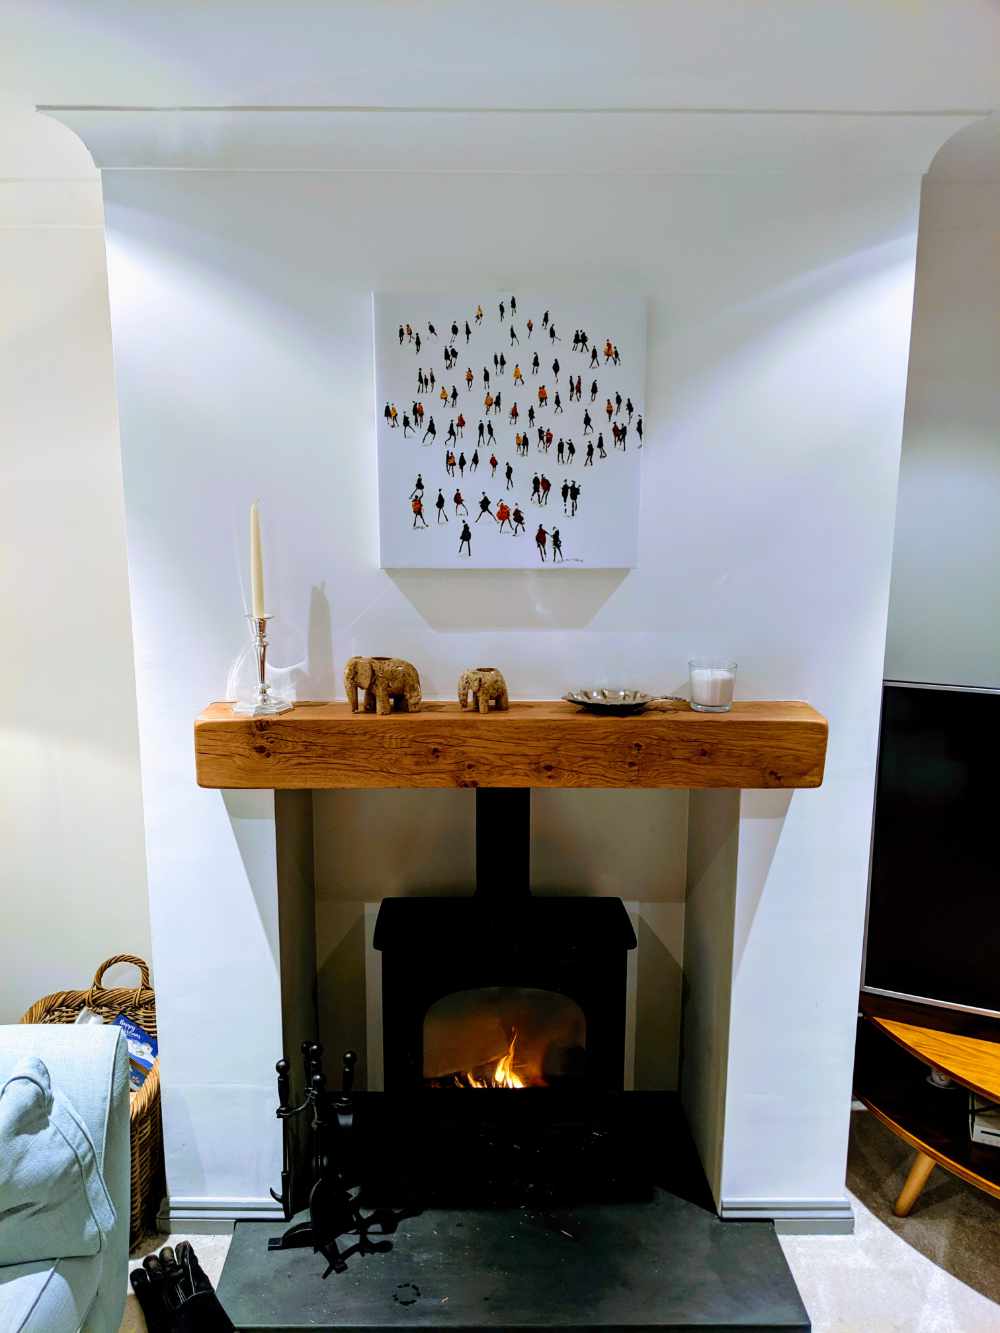 Birging canvas by Neil Mcbride, nicely displayed above a stove.  2020